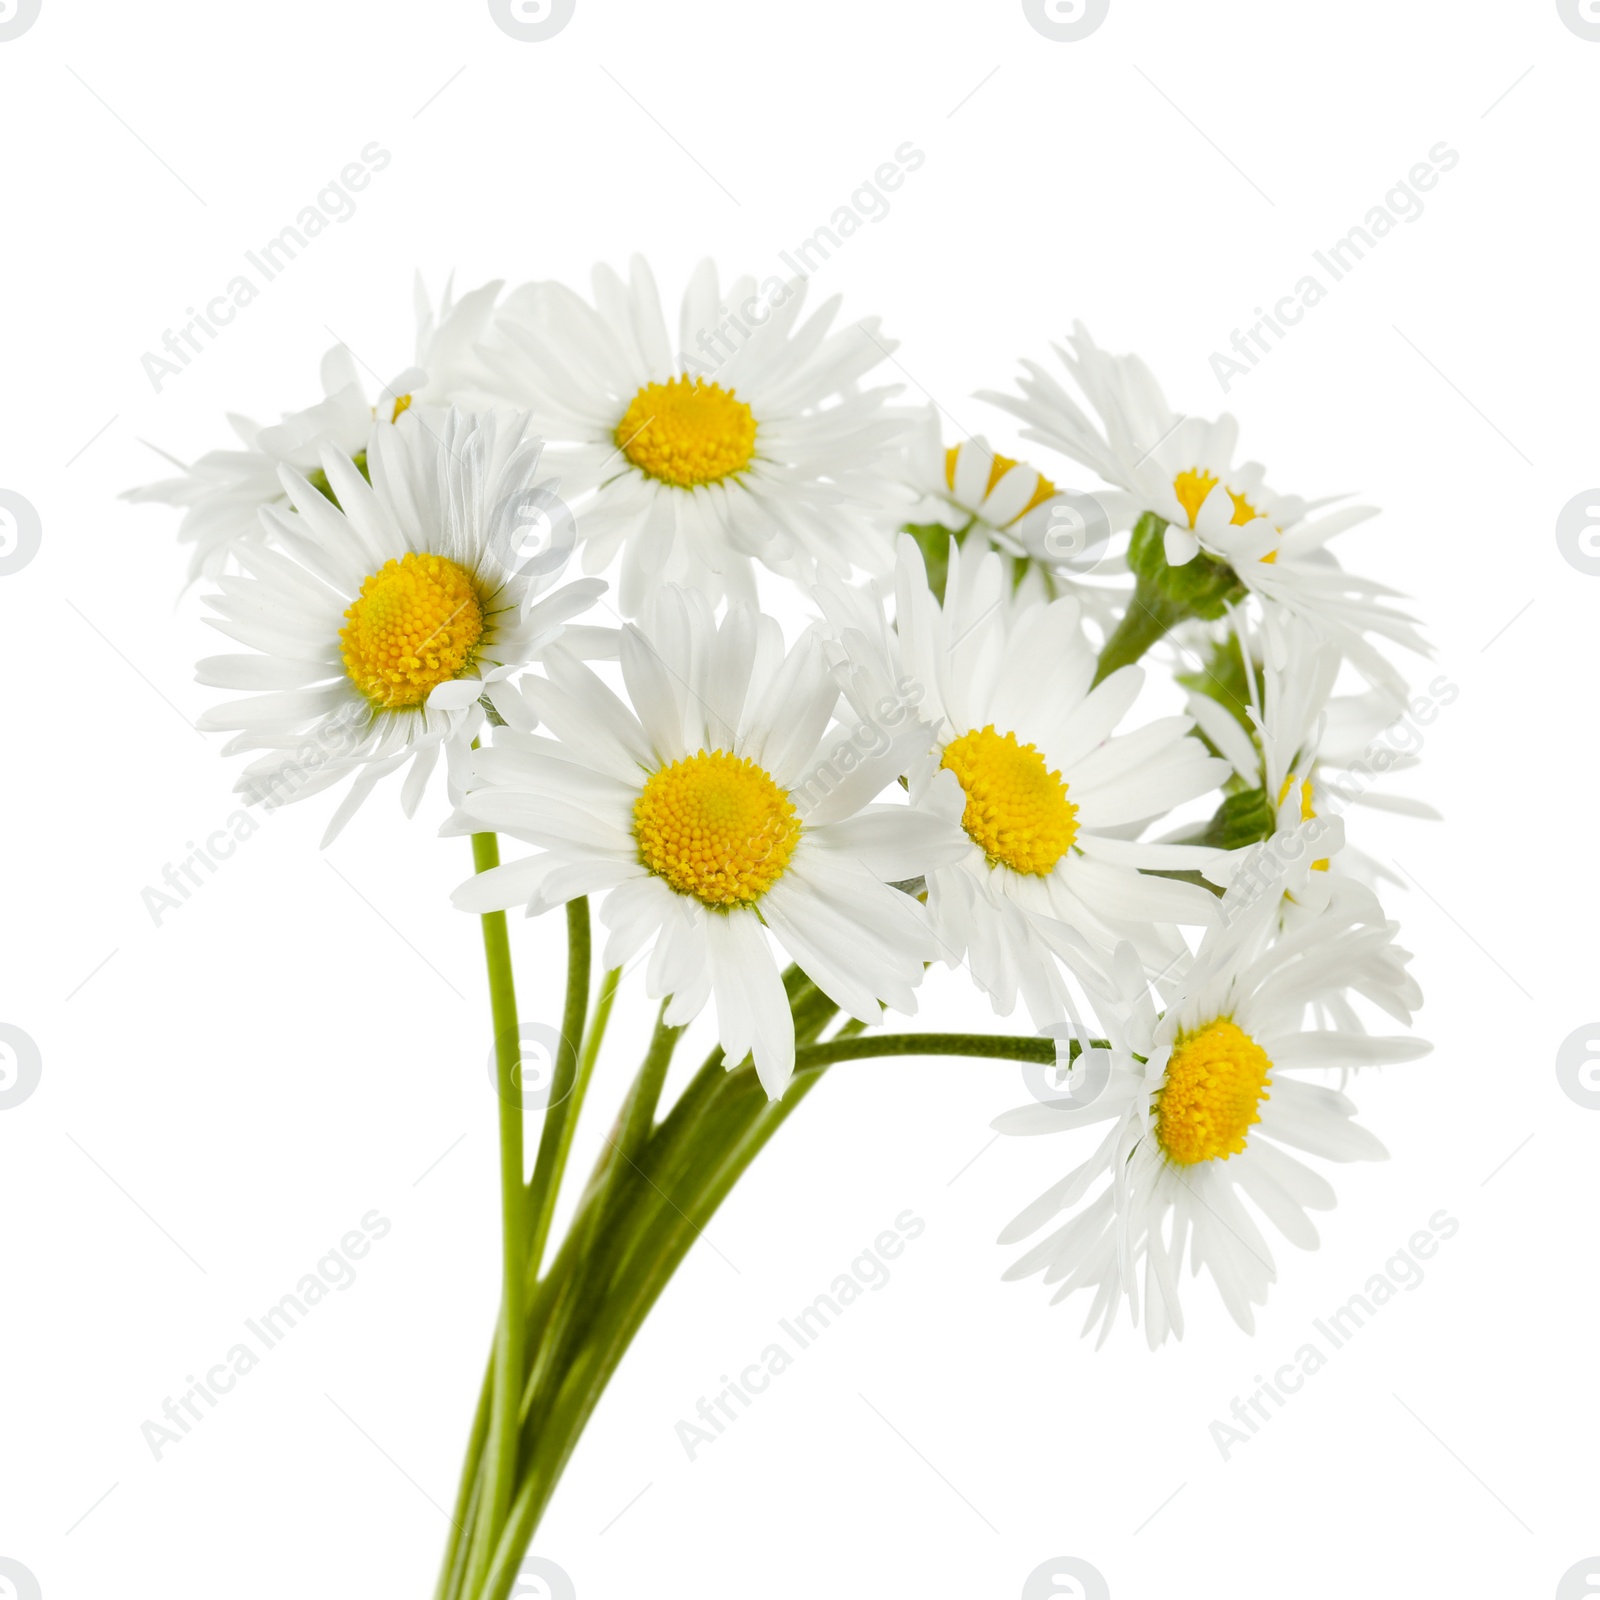 Photo of Bunch of beautiful daisy flowers on white background